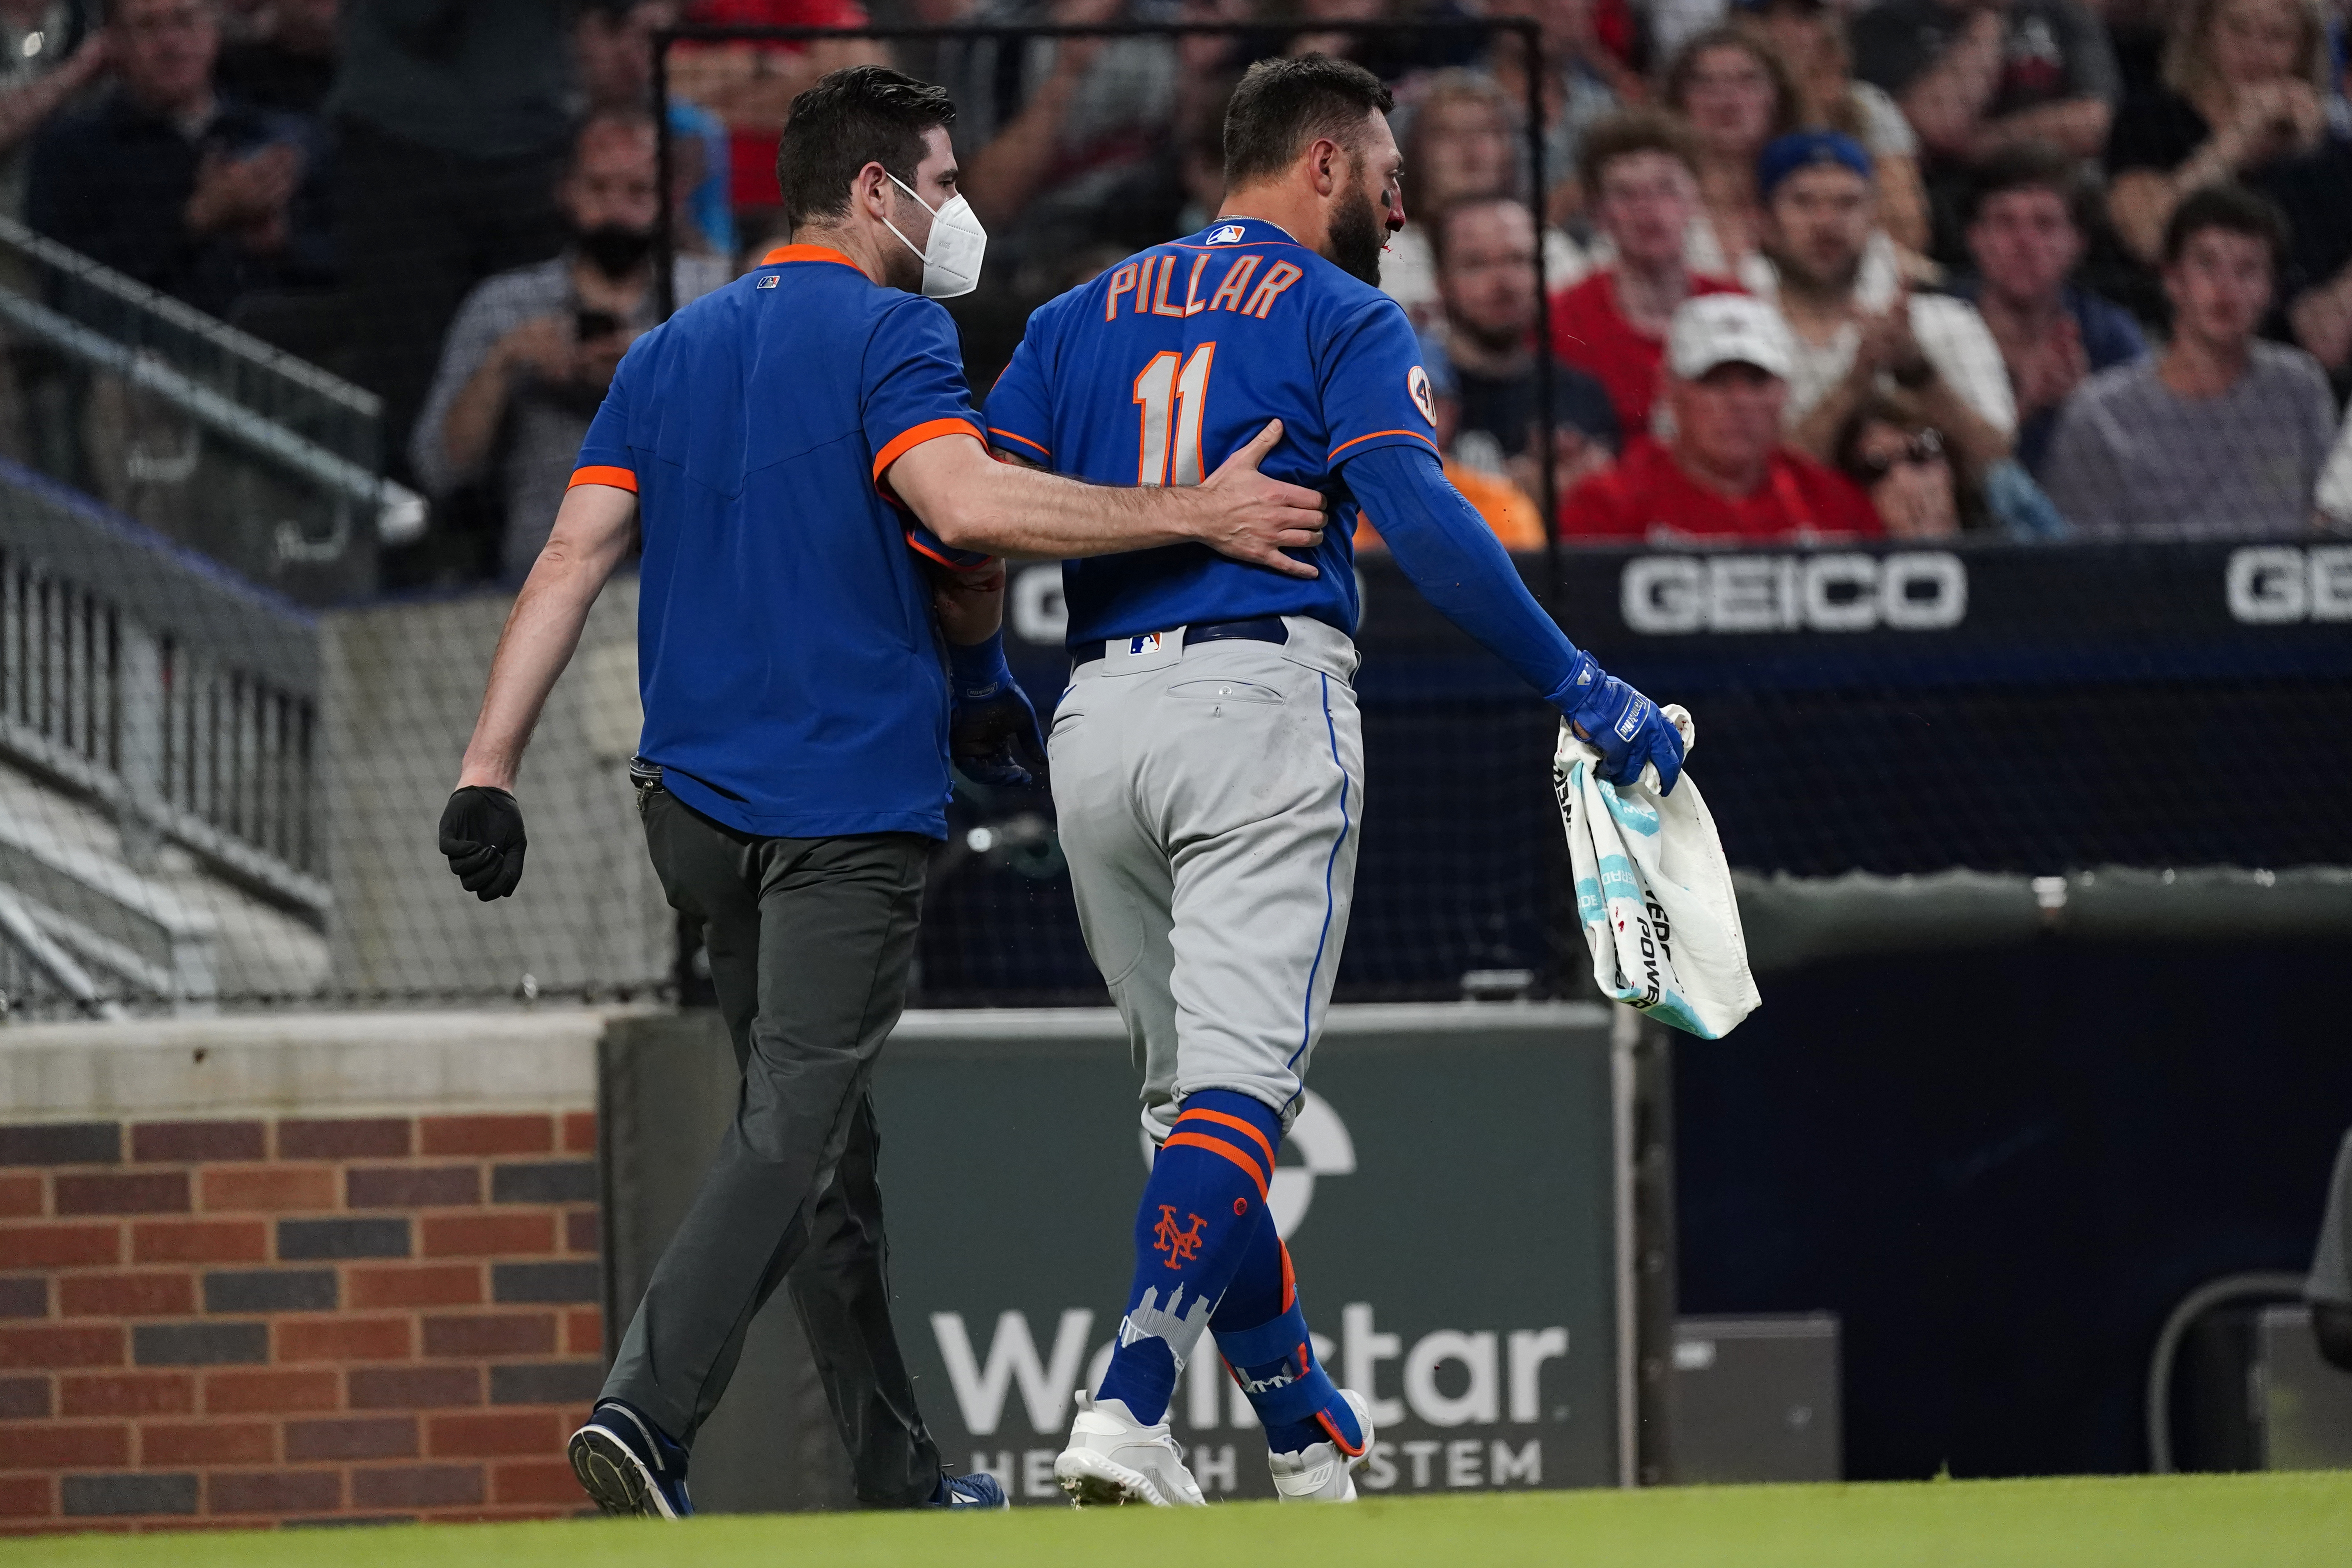 I feel good, I feel lucky': Kevin Pillar placed on injured list, but upbeat  after taking fastball to the face - The Boston Globe